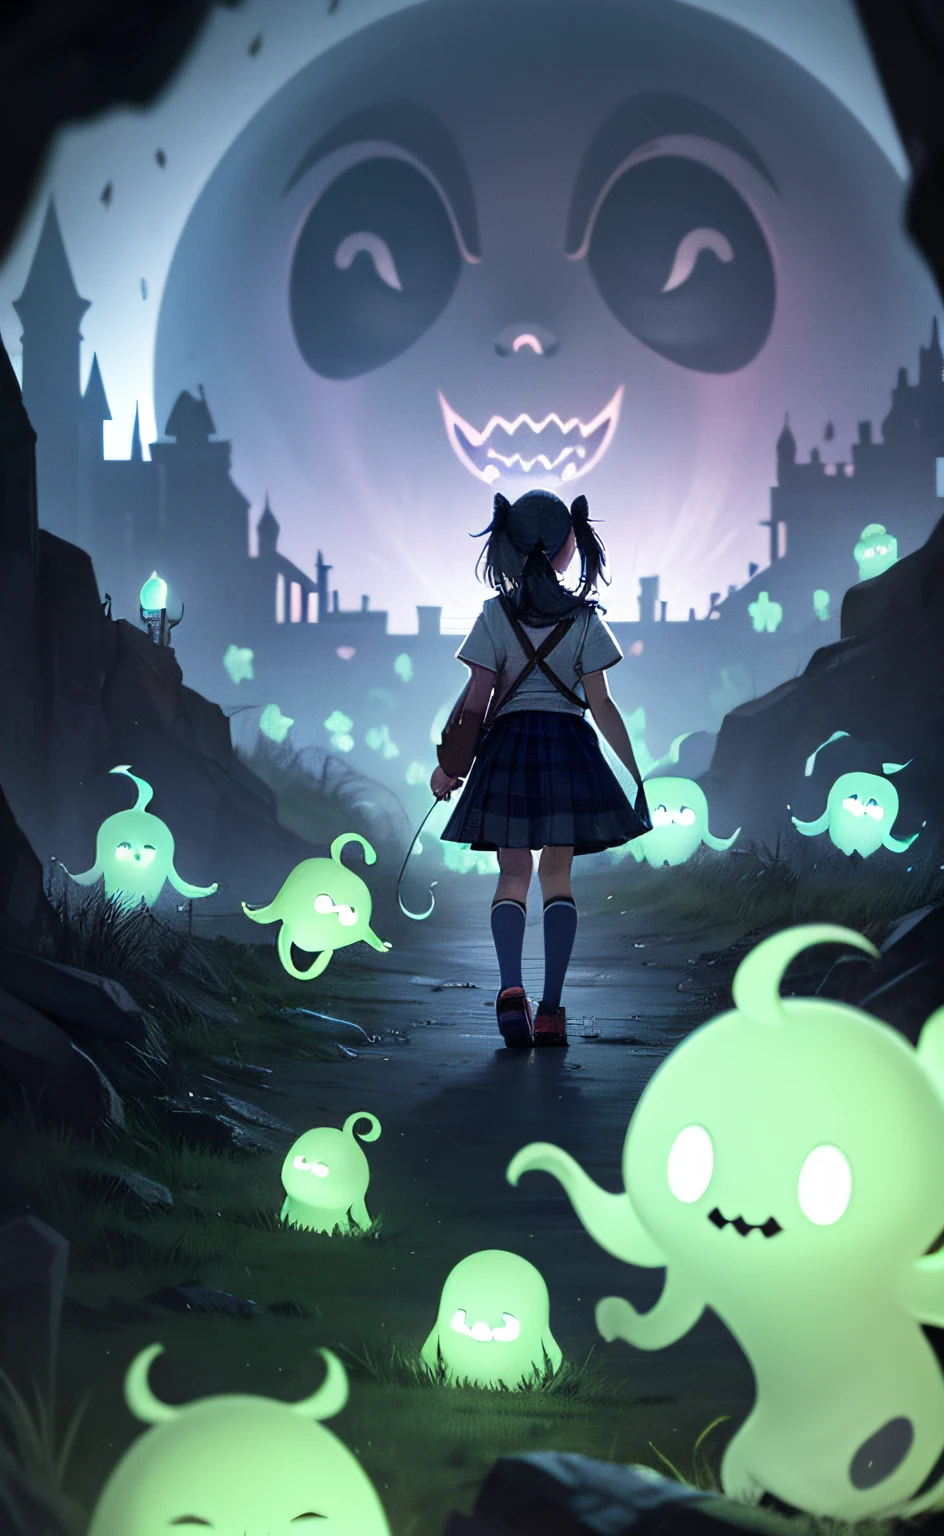 masterpiece, best quality,  exploring a haunted theme park, haunted by cute chibi ghosts, cute, whimsical, glow, glowing, fun, silly, mystical, magical, arcane, funny, amusing